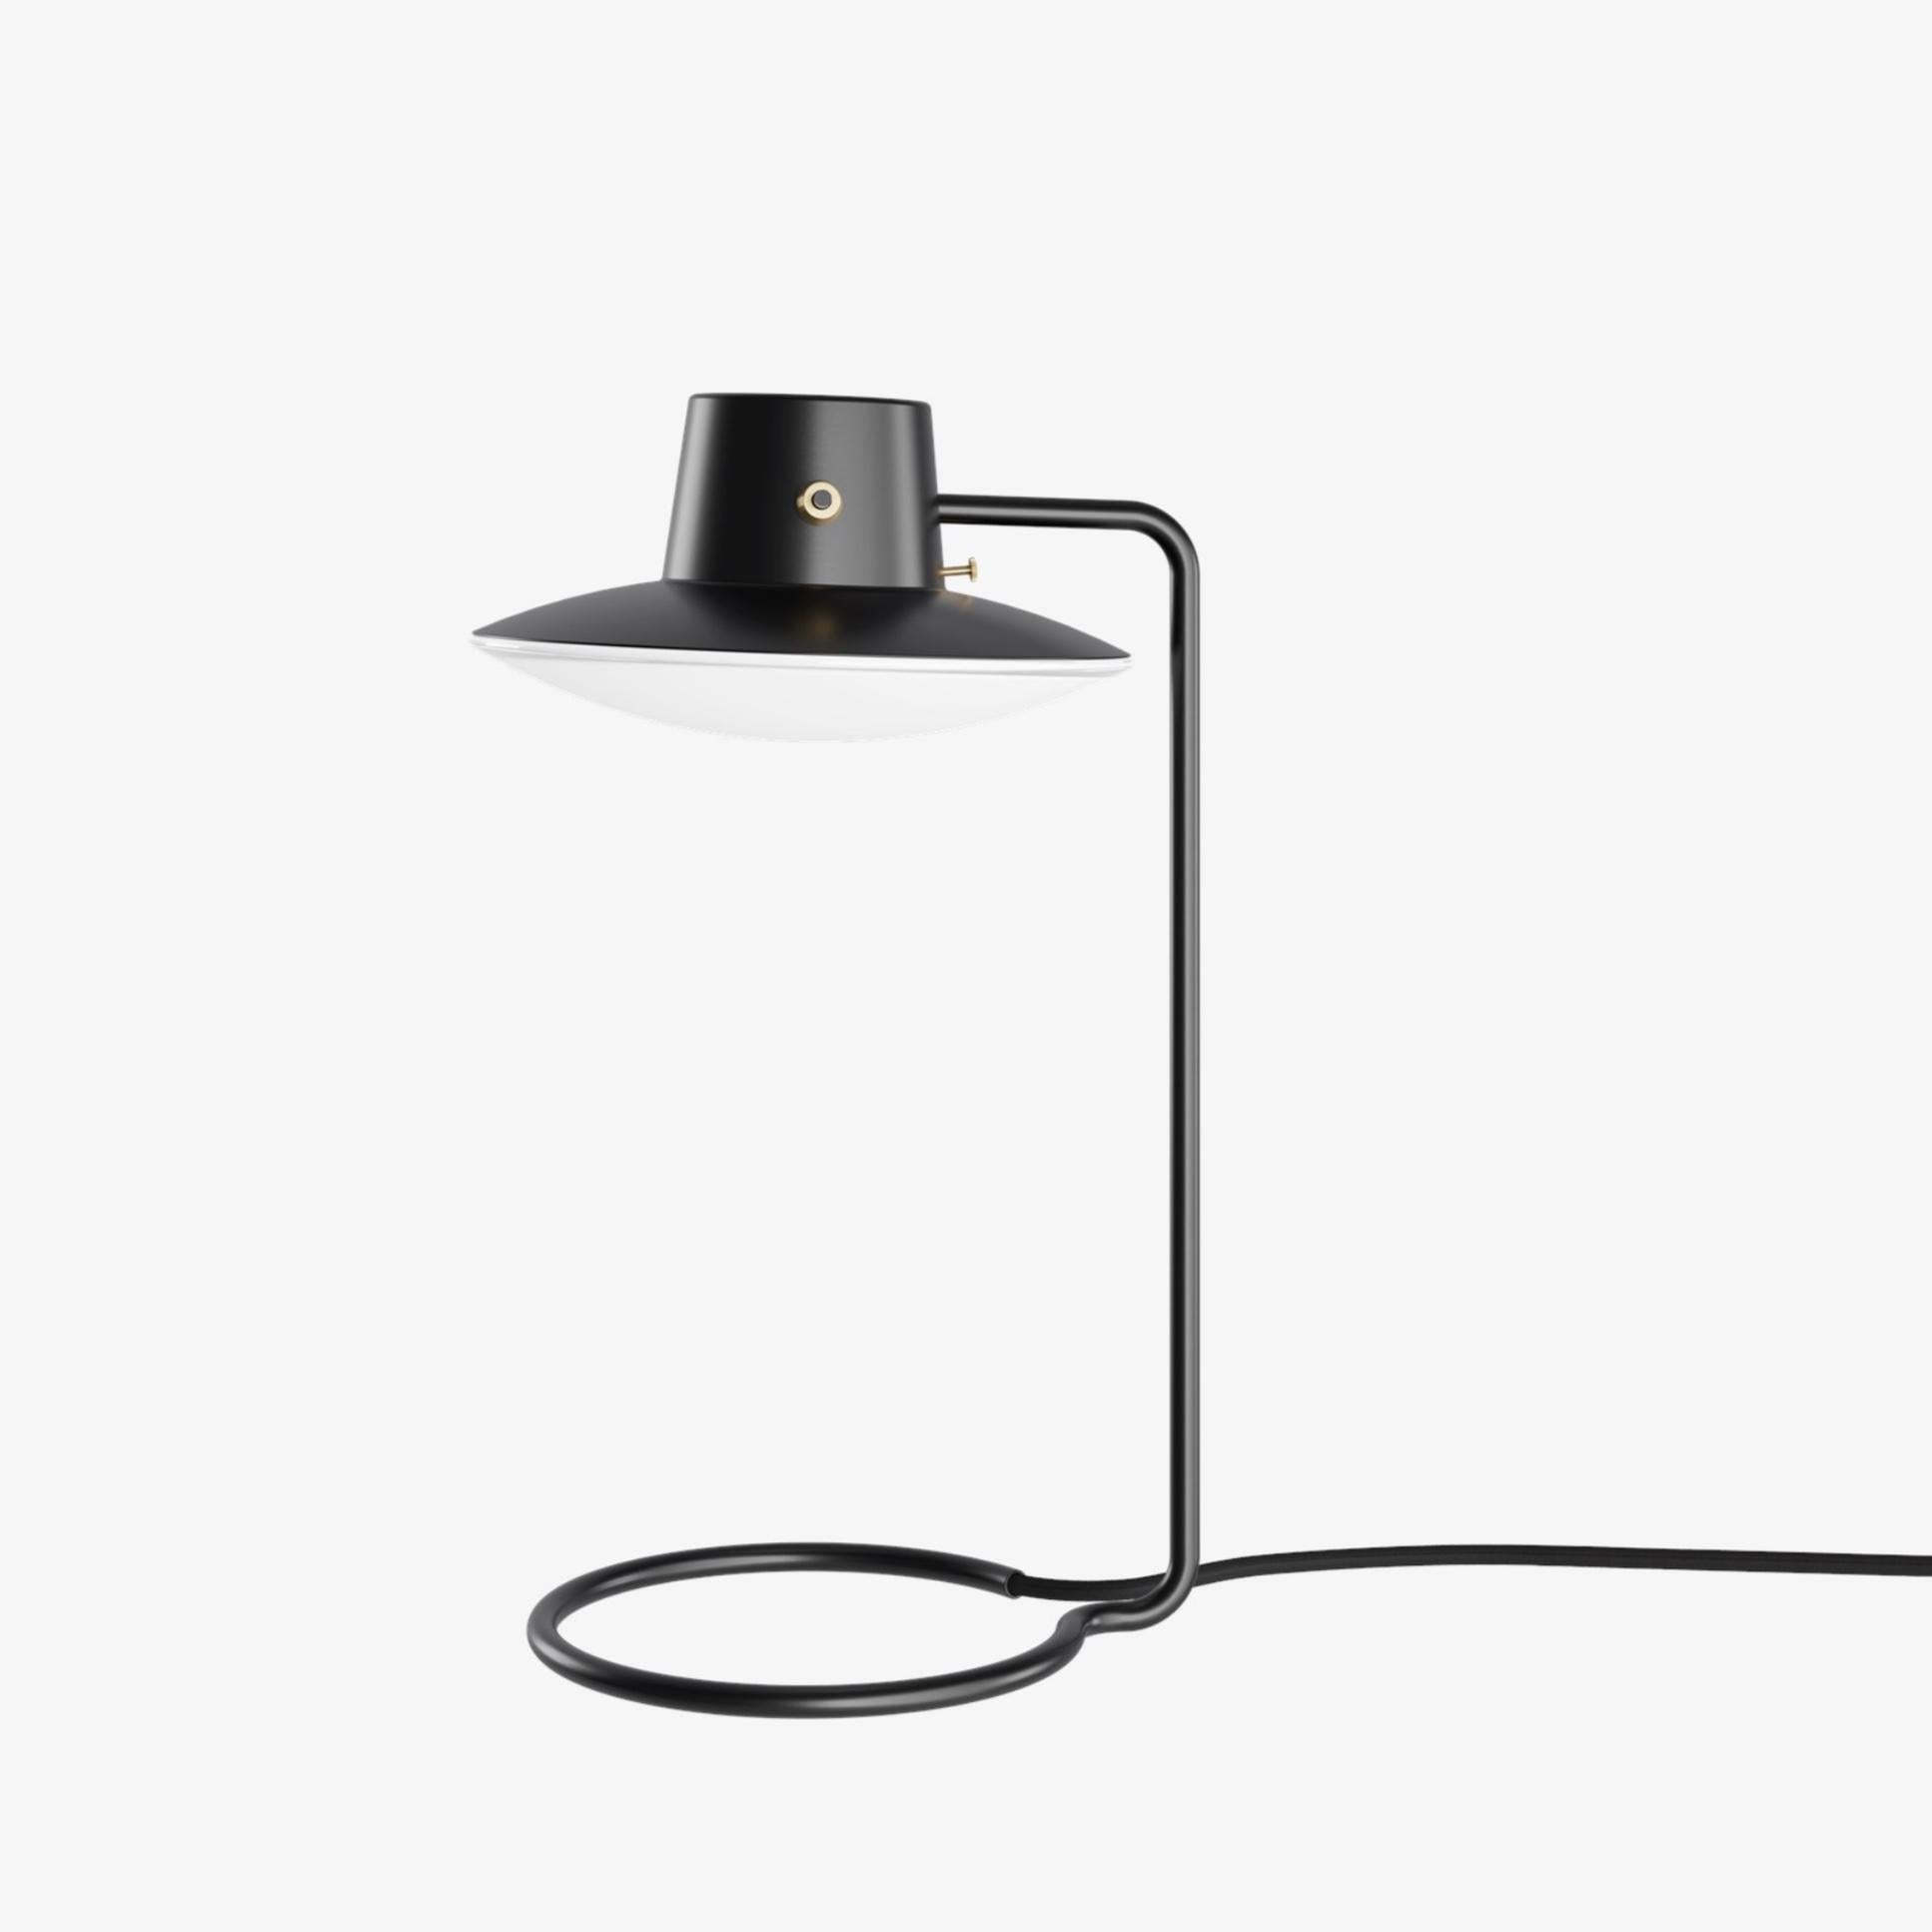 Arne Jacobsen AJ Oxford Table Lamp with Metal Shade for Louis Poulsen, 1963 For Sale 3